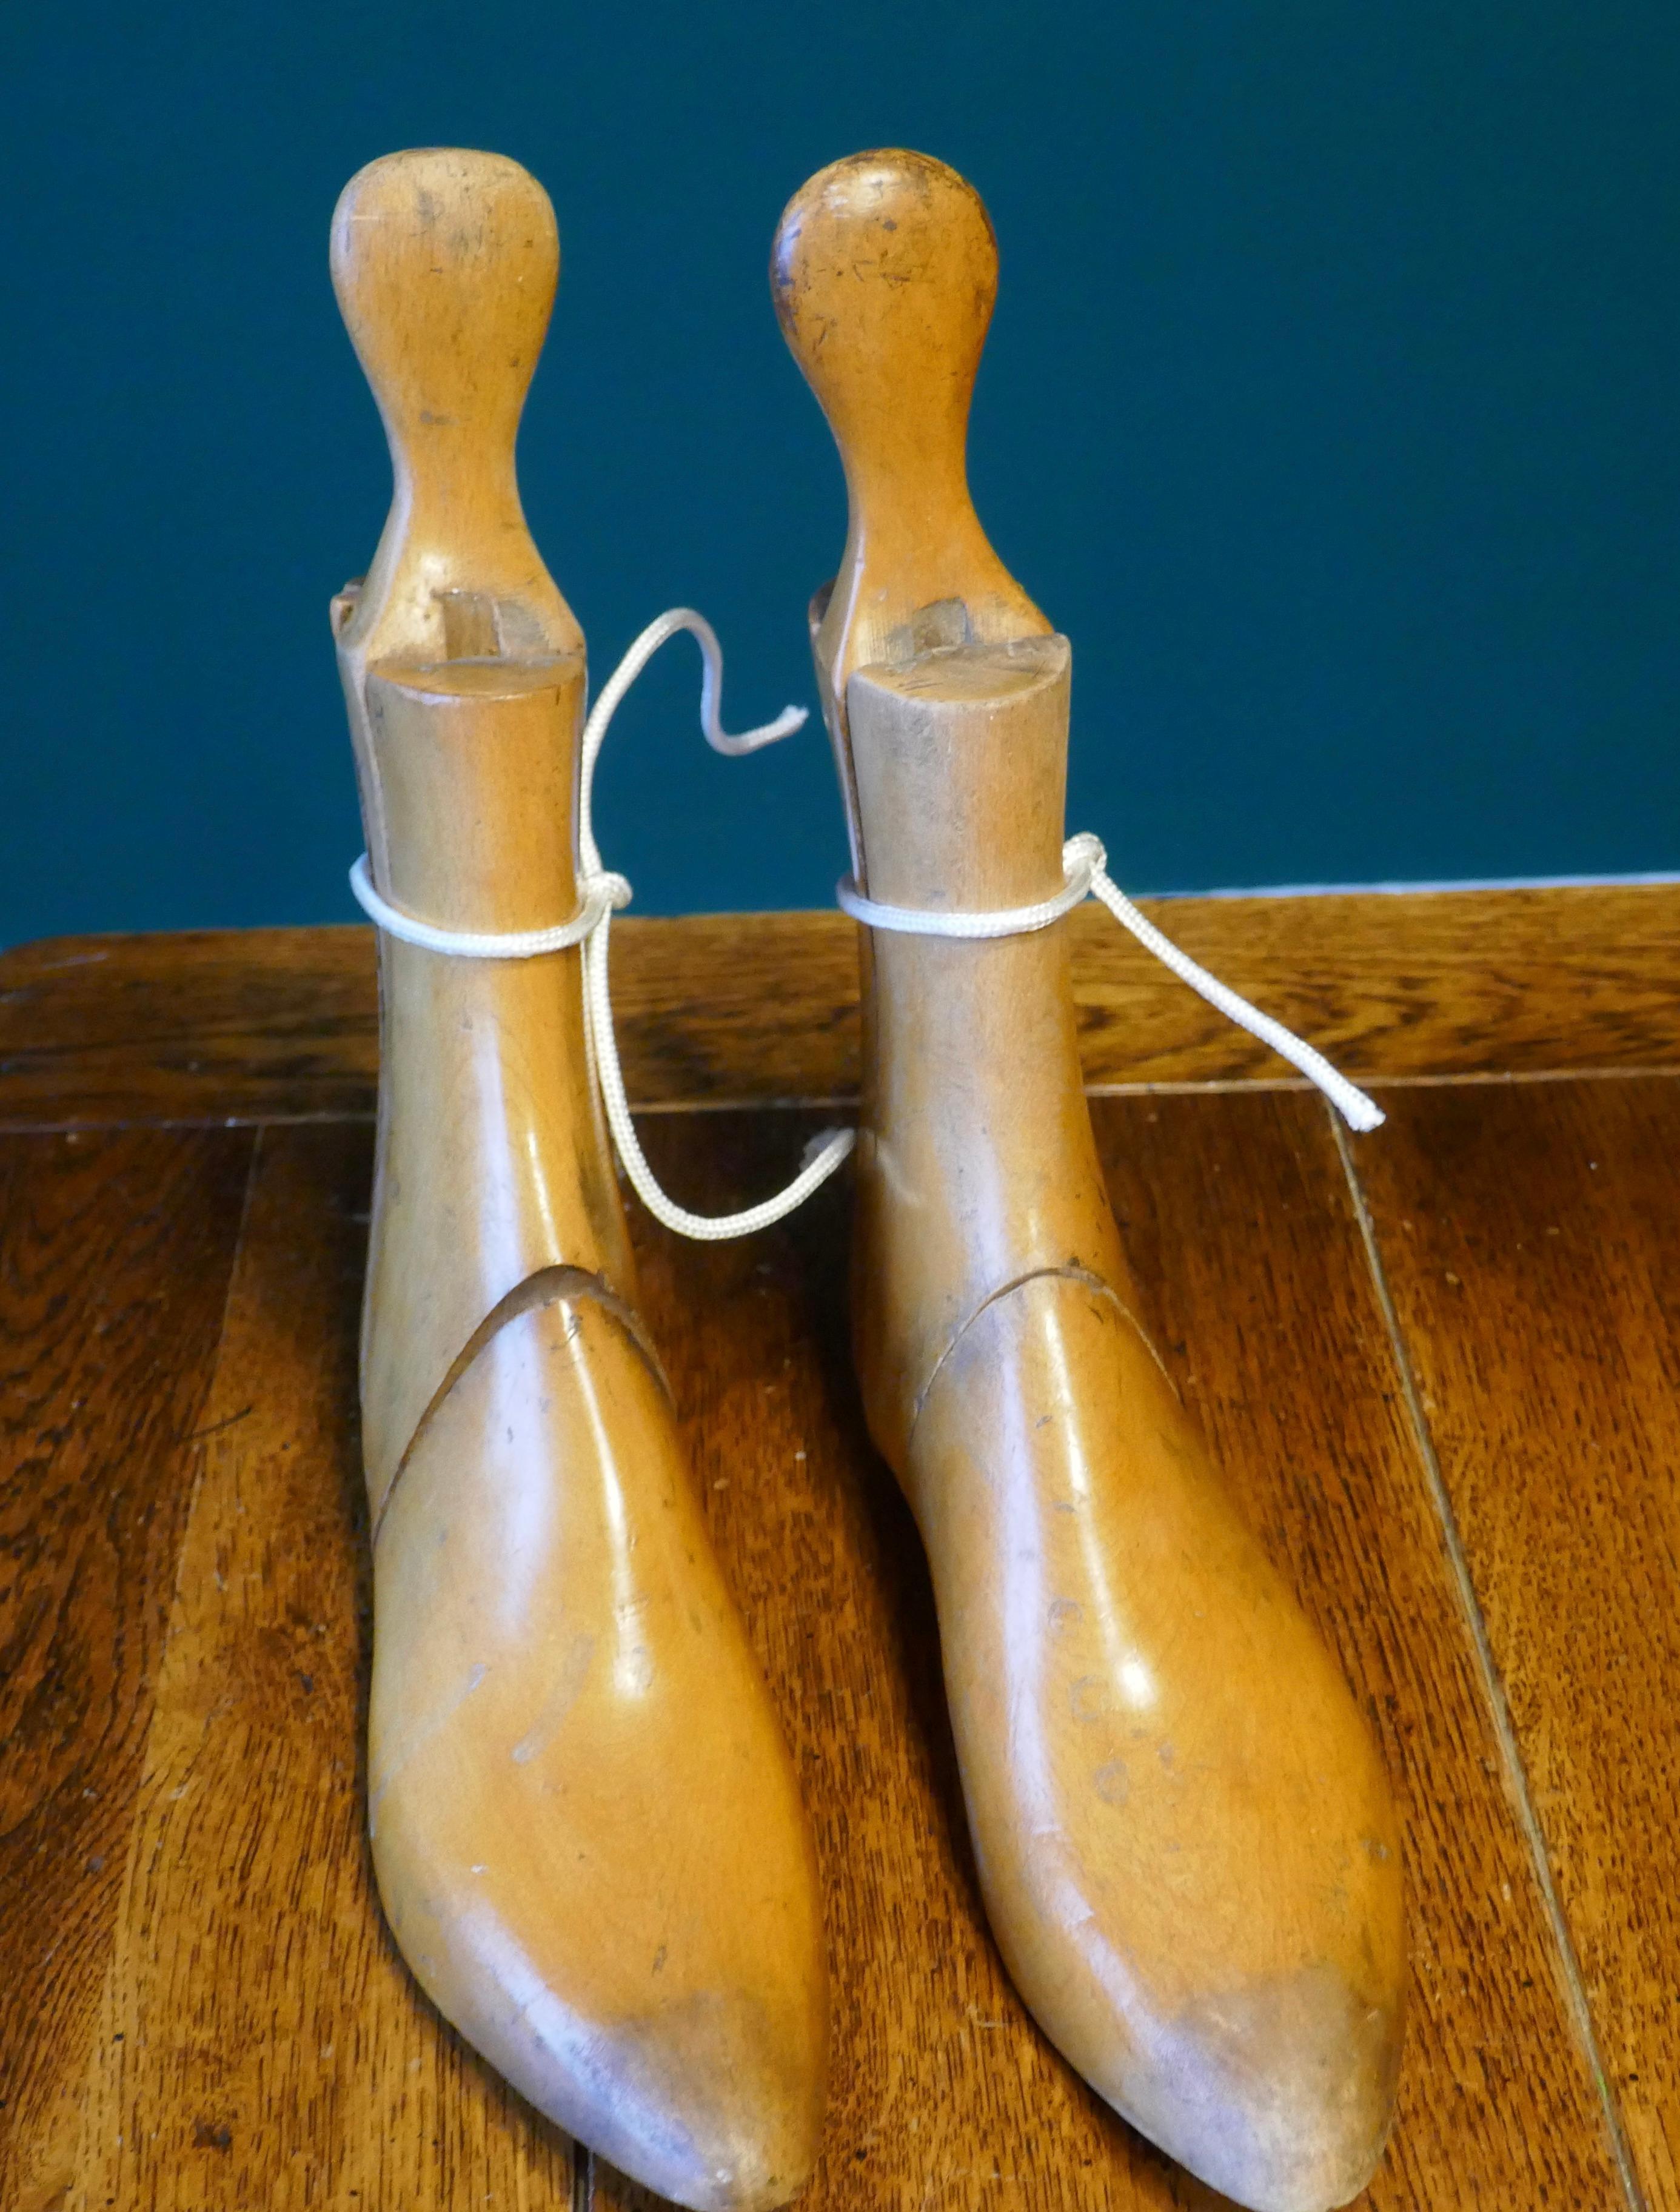 19th Century Ladies Treen Ankle Boot or Shoe Stretchers

A great looking pair, made in Golden Beech, the stretchers come into 3 and are easy to use
The Stretchers are in very good vintage condition and a great display piece

The stretchers are